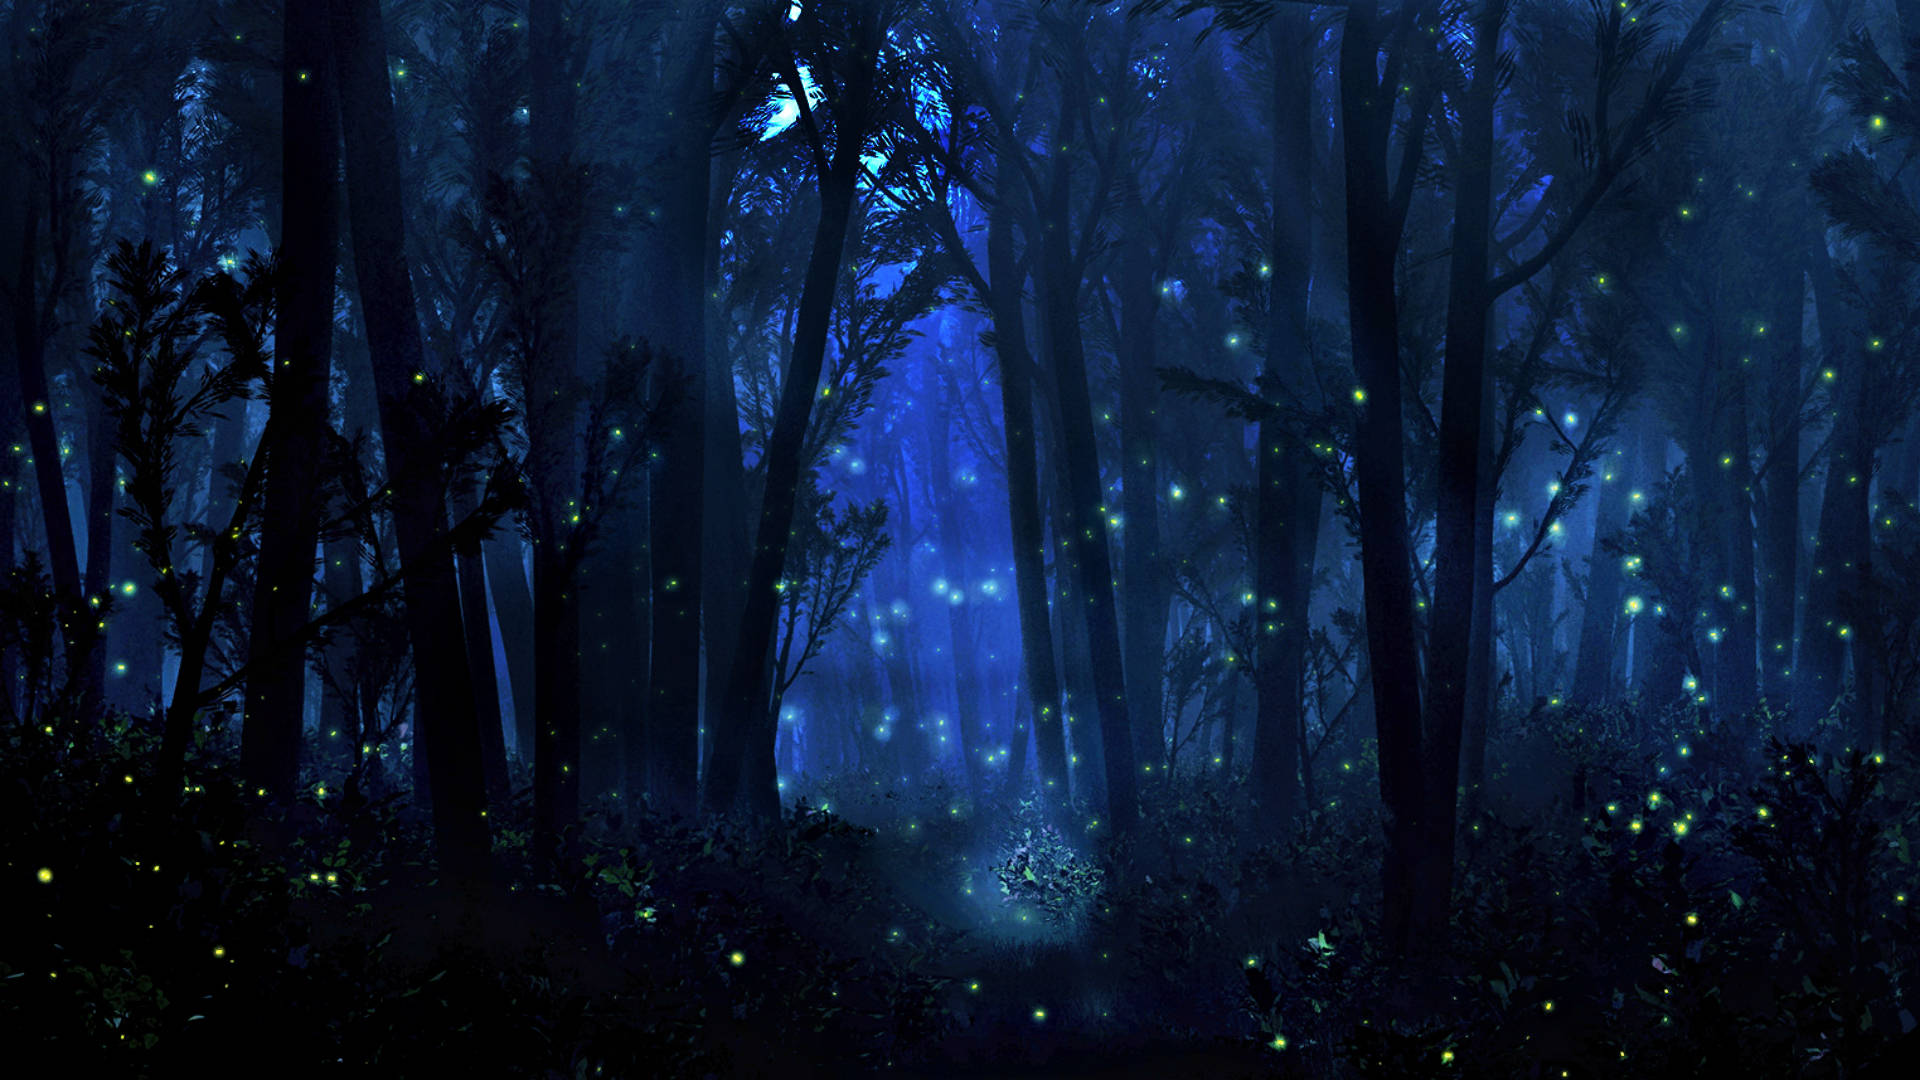 "Explore the magical beauty of Mystical Forest" Wallpaper